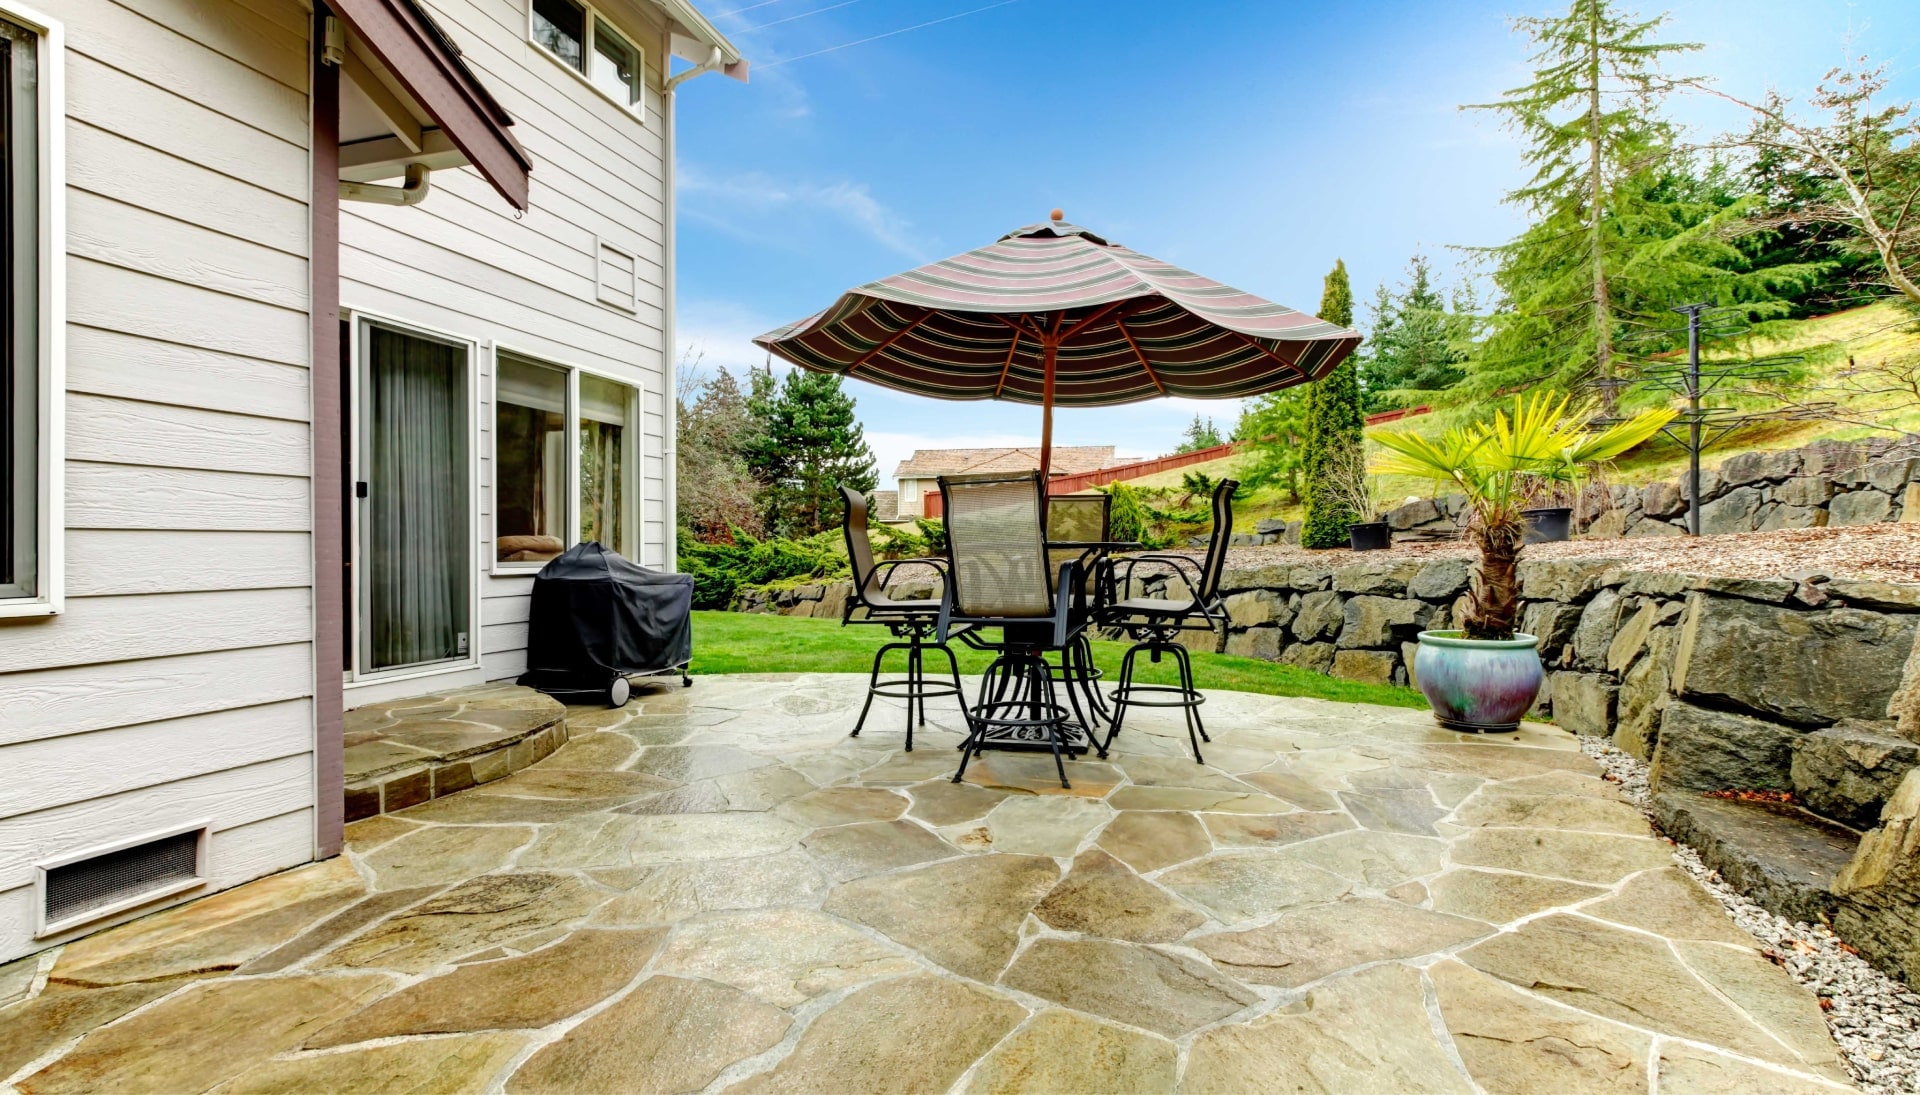 Beautifully Textured and Patterned Concrete Patios in Parker, Colorado area!